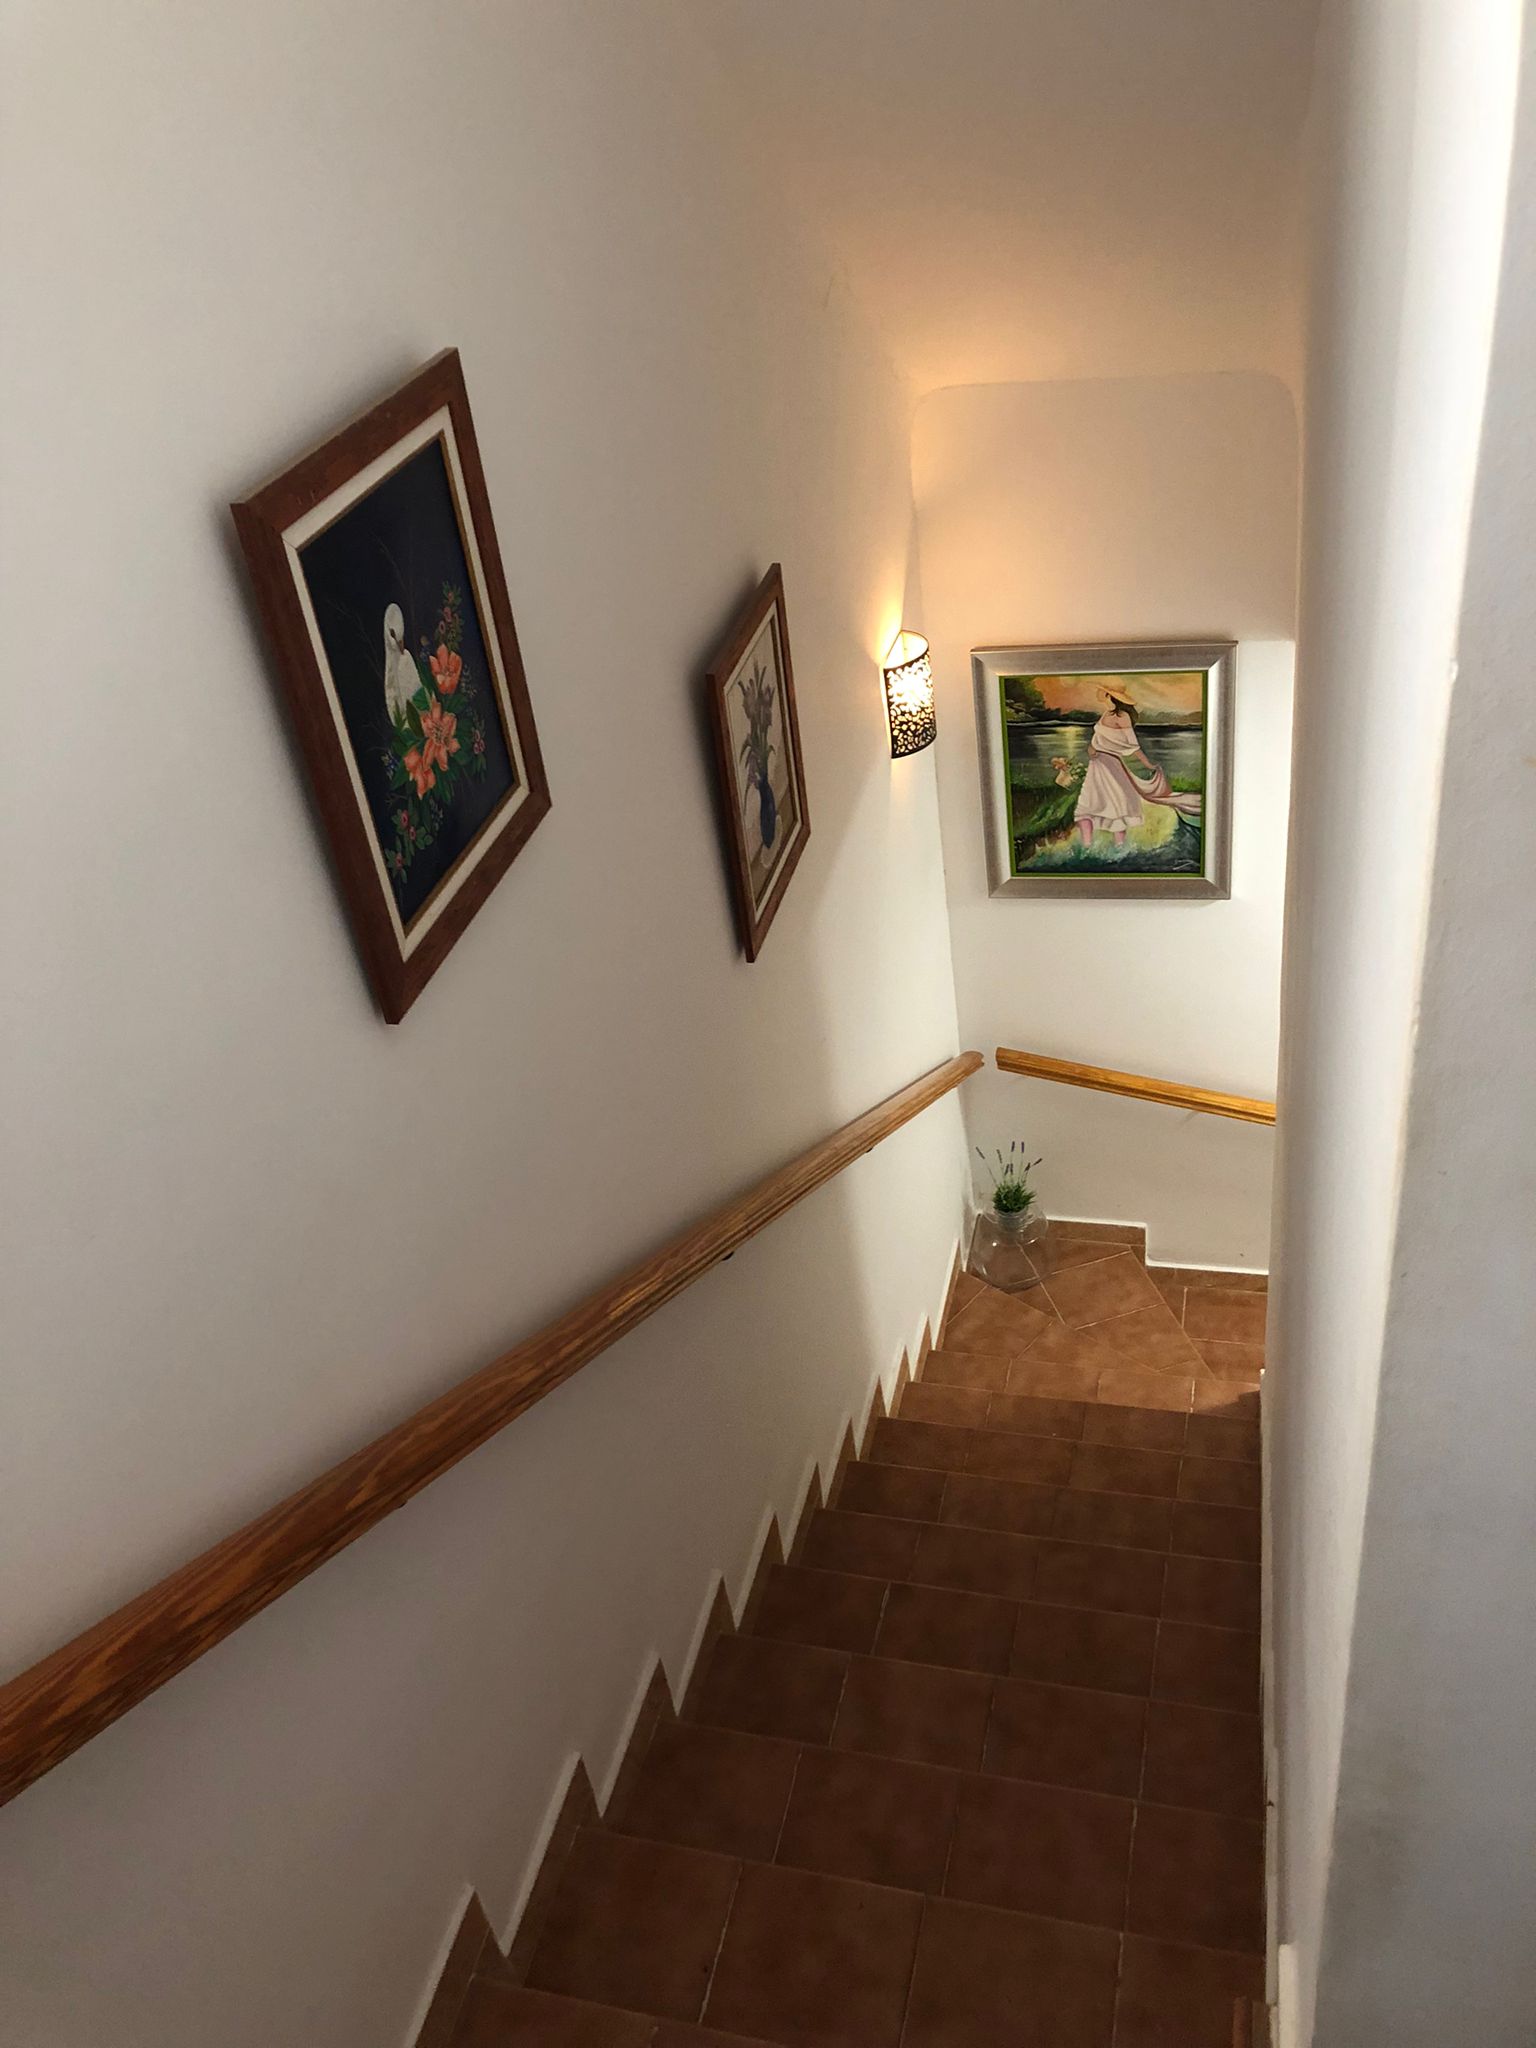 La Nucia: Spacious townhouse with 3 bedrooms